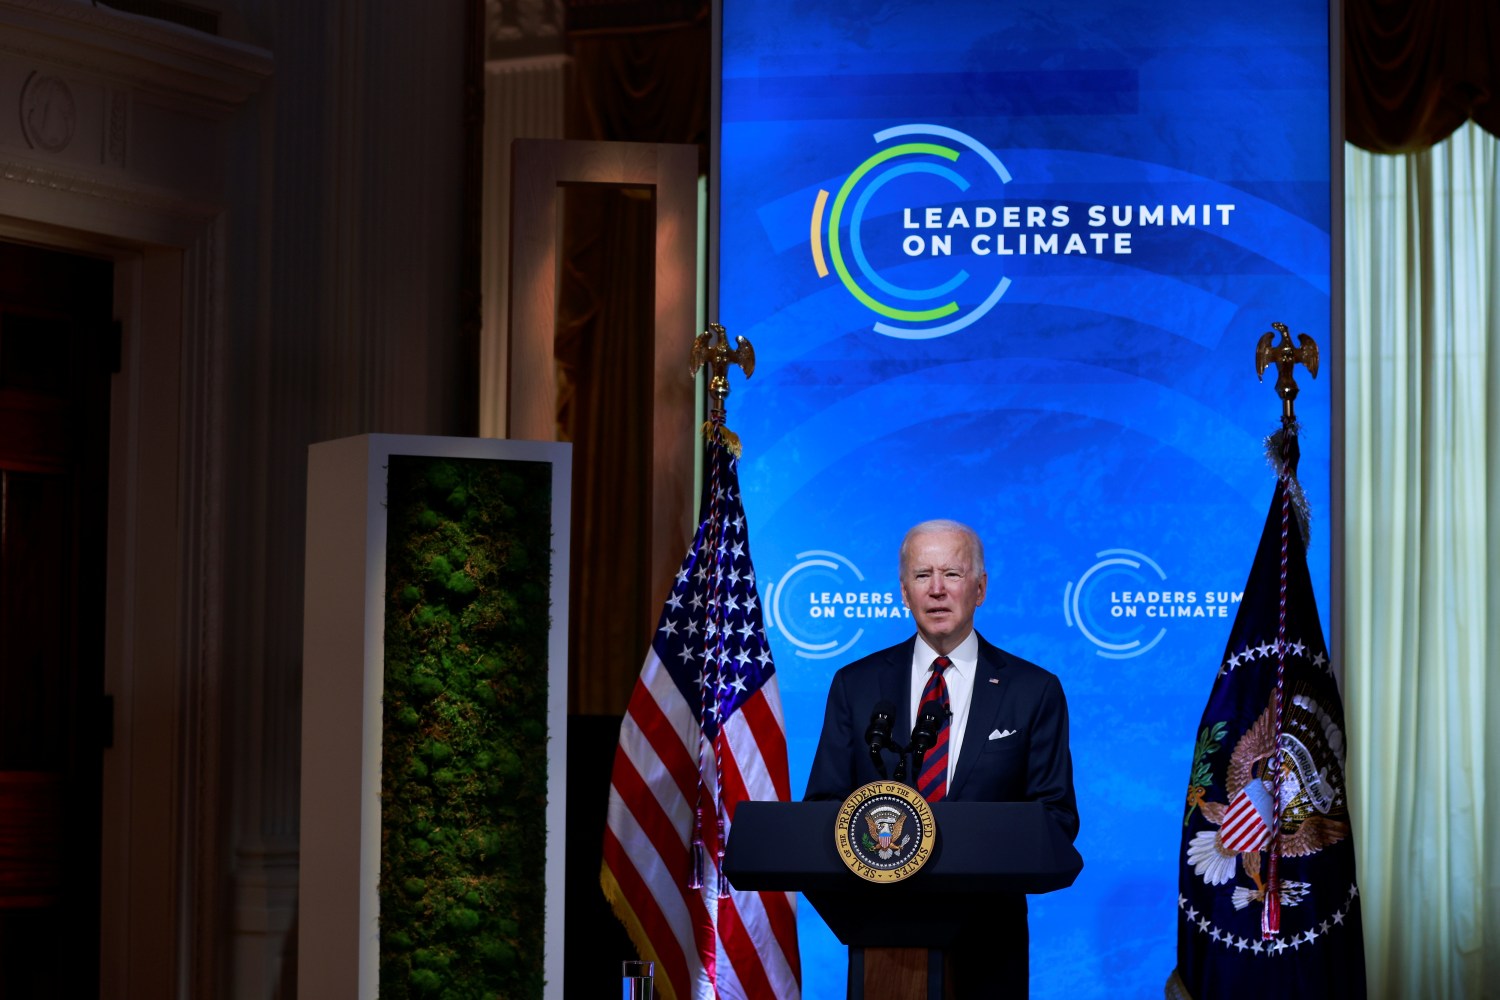 U.S. President Joe Biden participates in a virtual Climate Summit with world leaders in the East Room at the White House in Washington, U.S., April 22, 2021. REUTERS/Tom Brenner